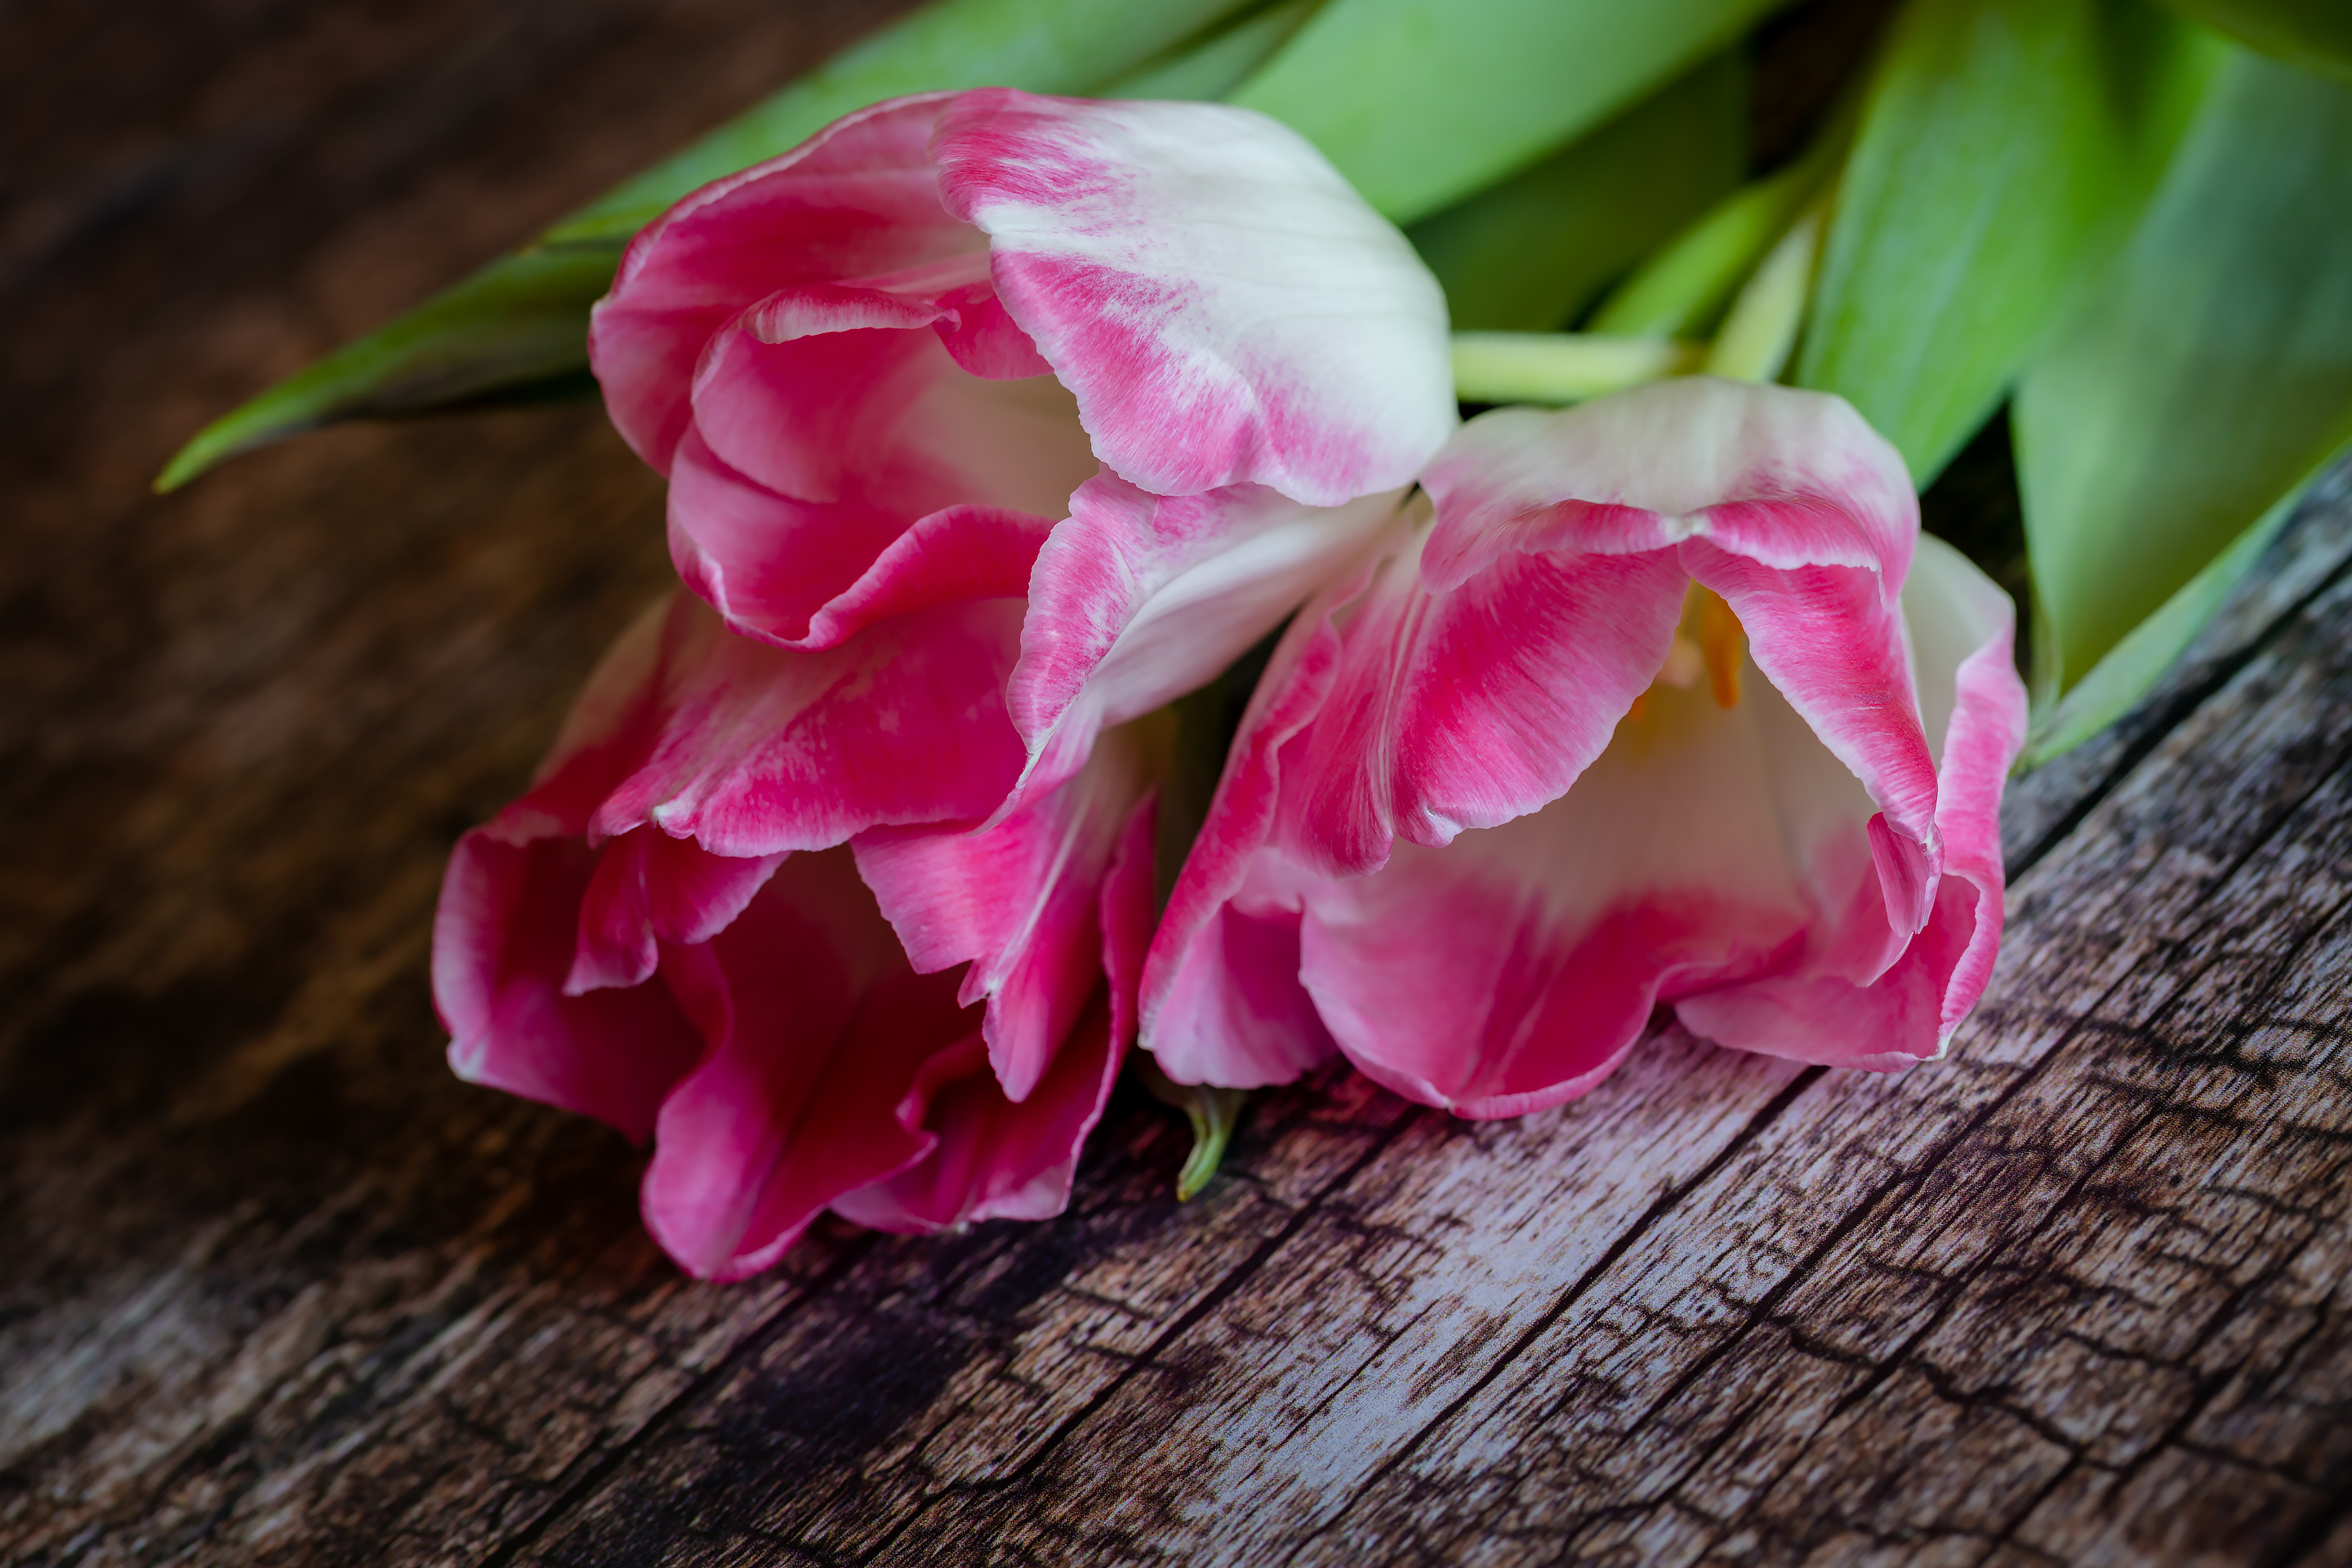 Three tulips on a wooden table.